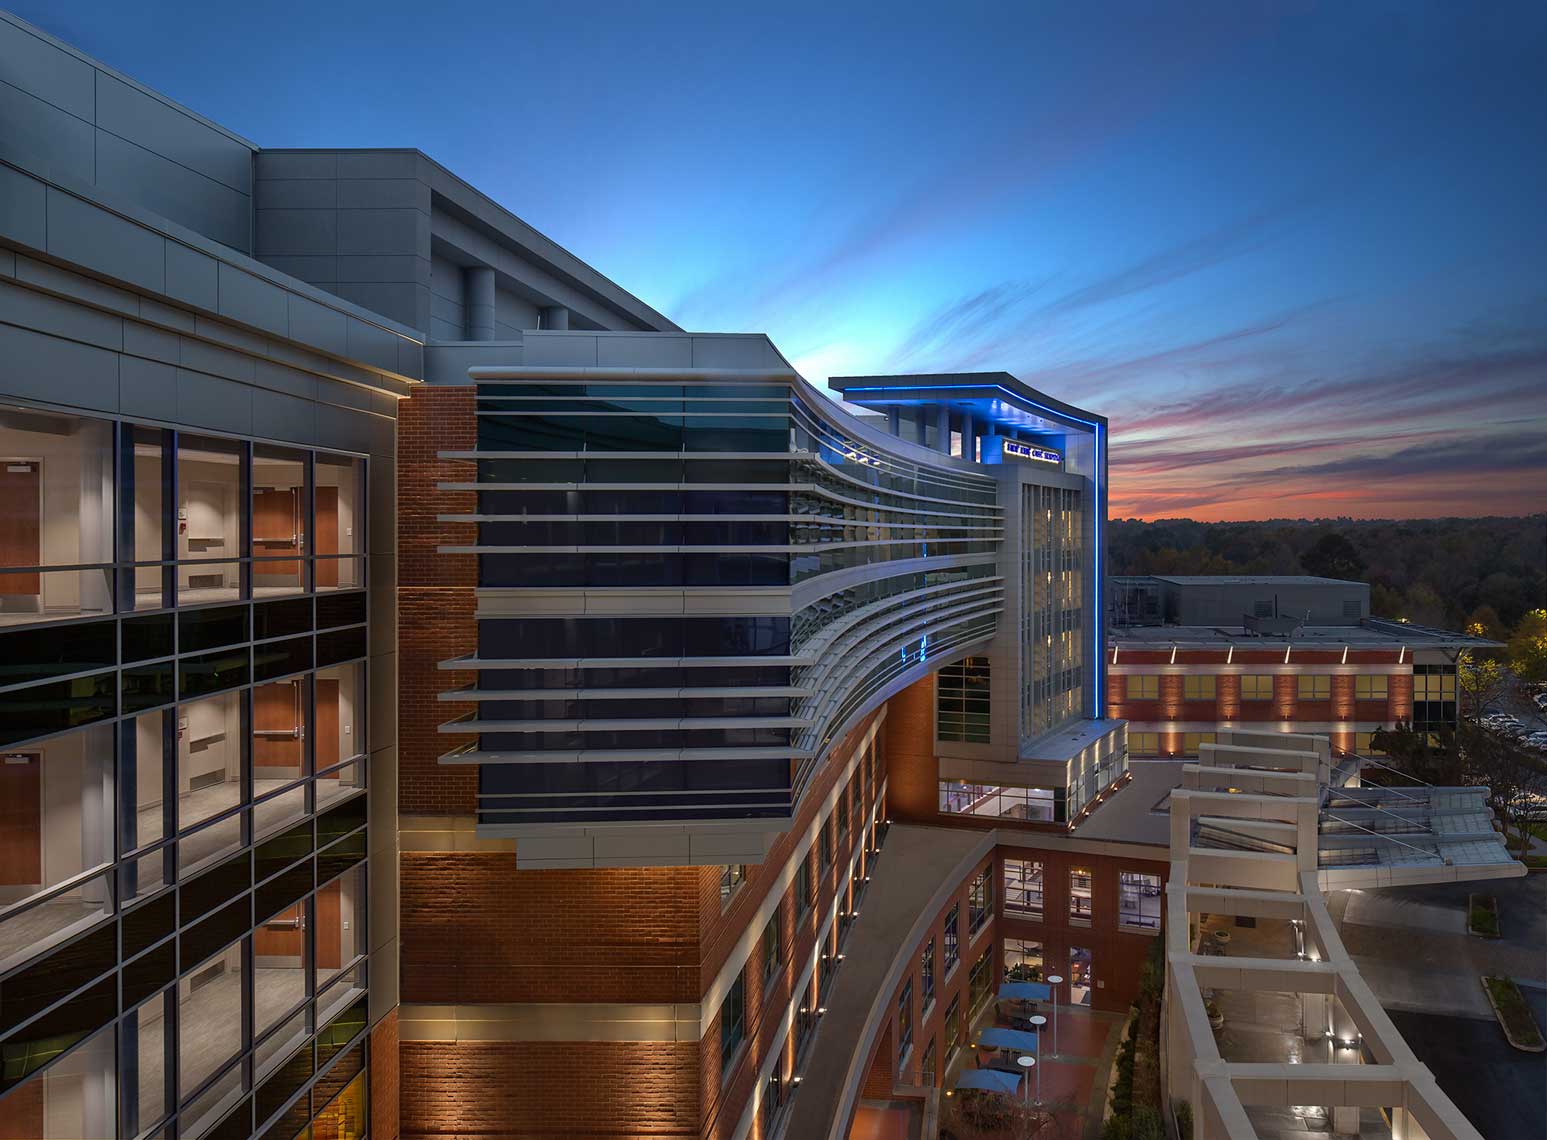 A stunning elevated twilight view of the vertical expansion at Emory Johns Creek Hospital